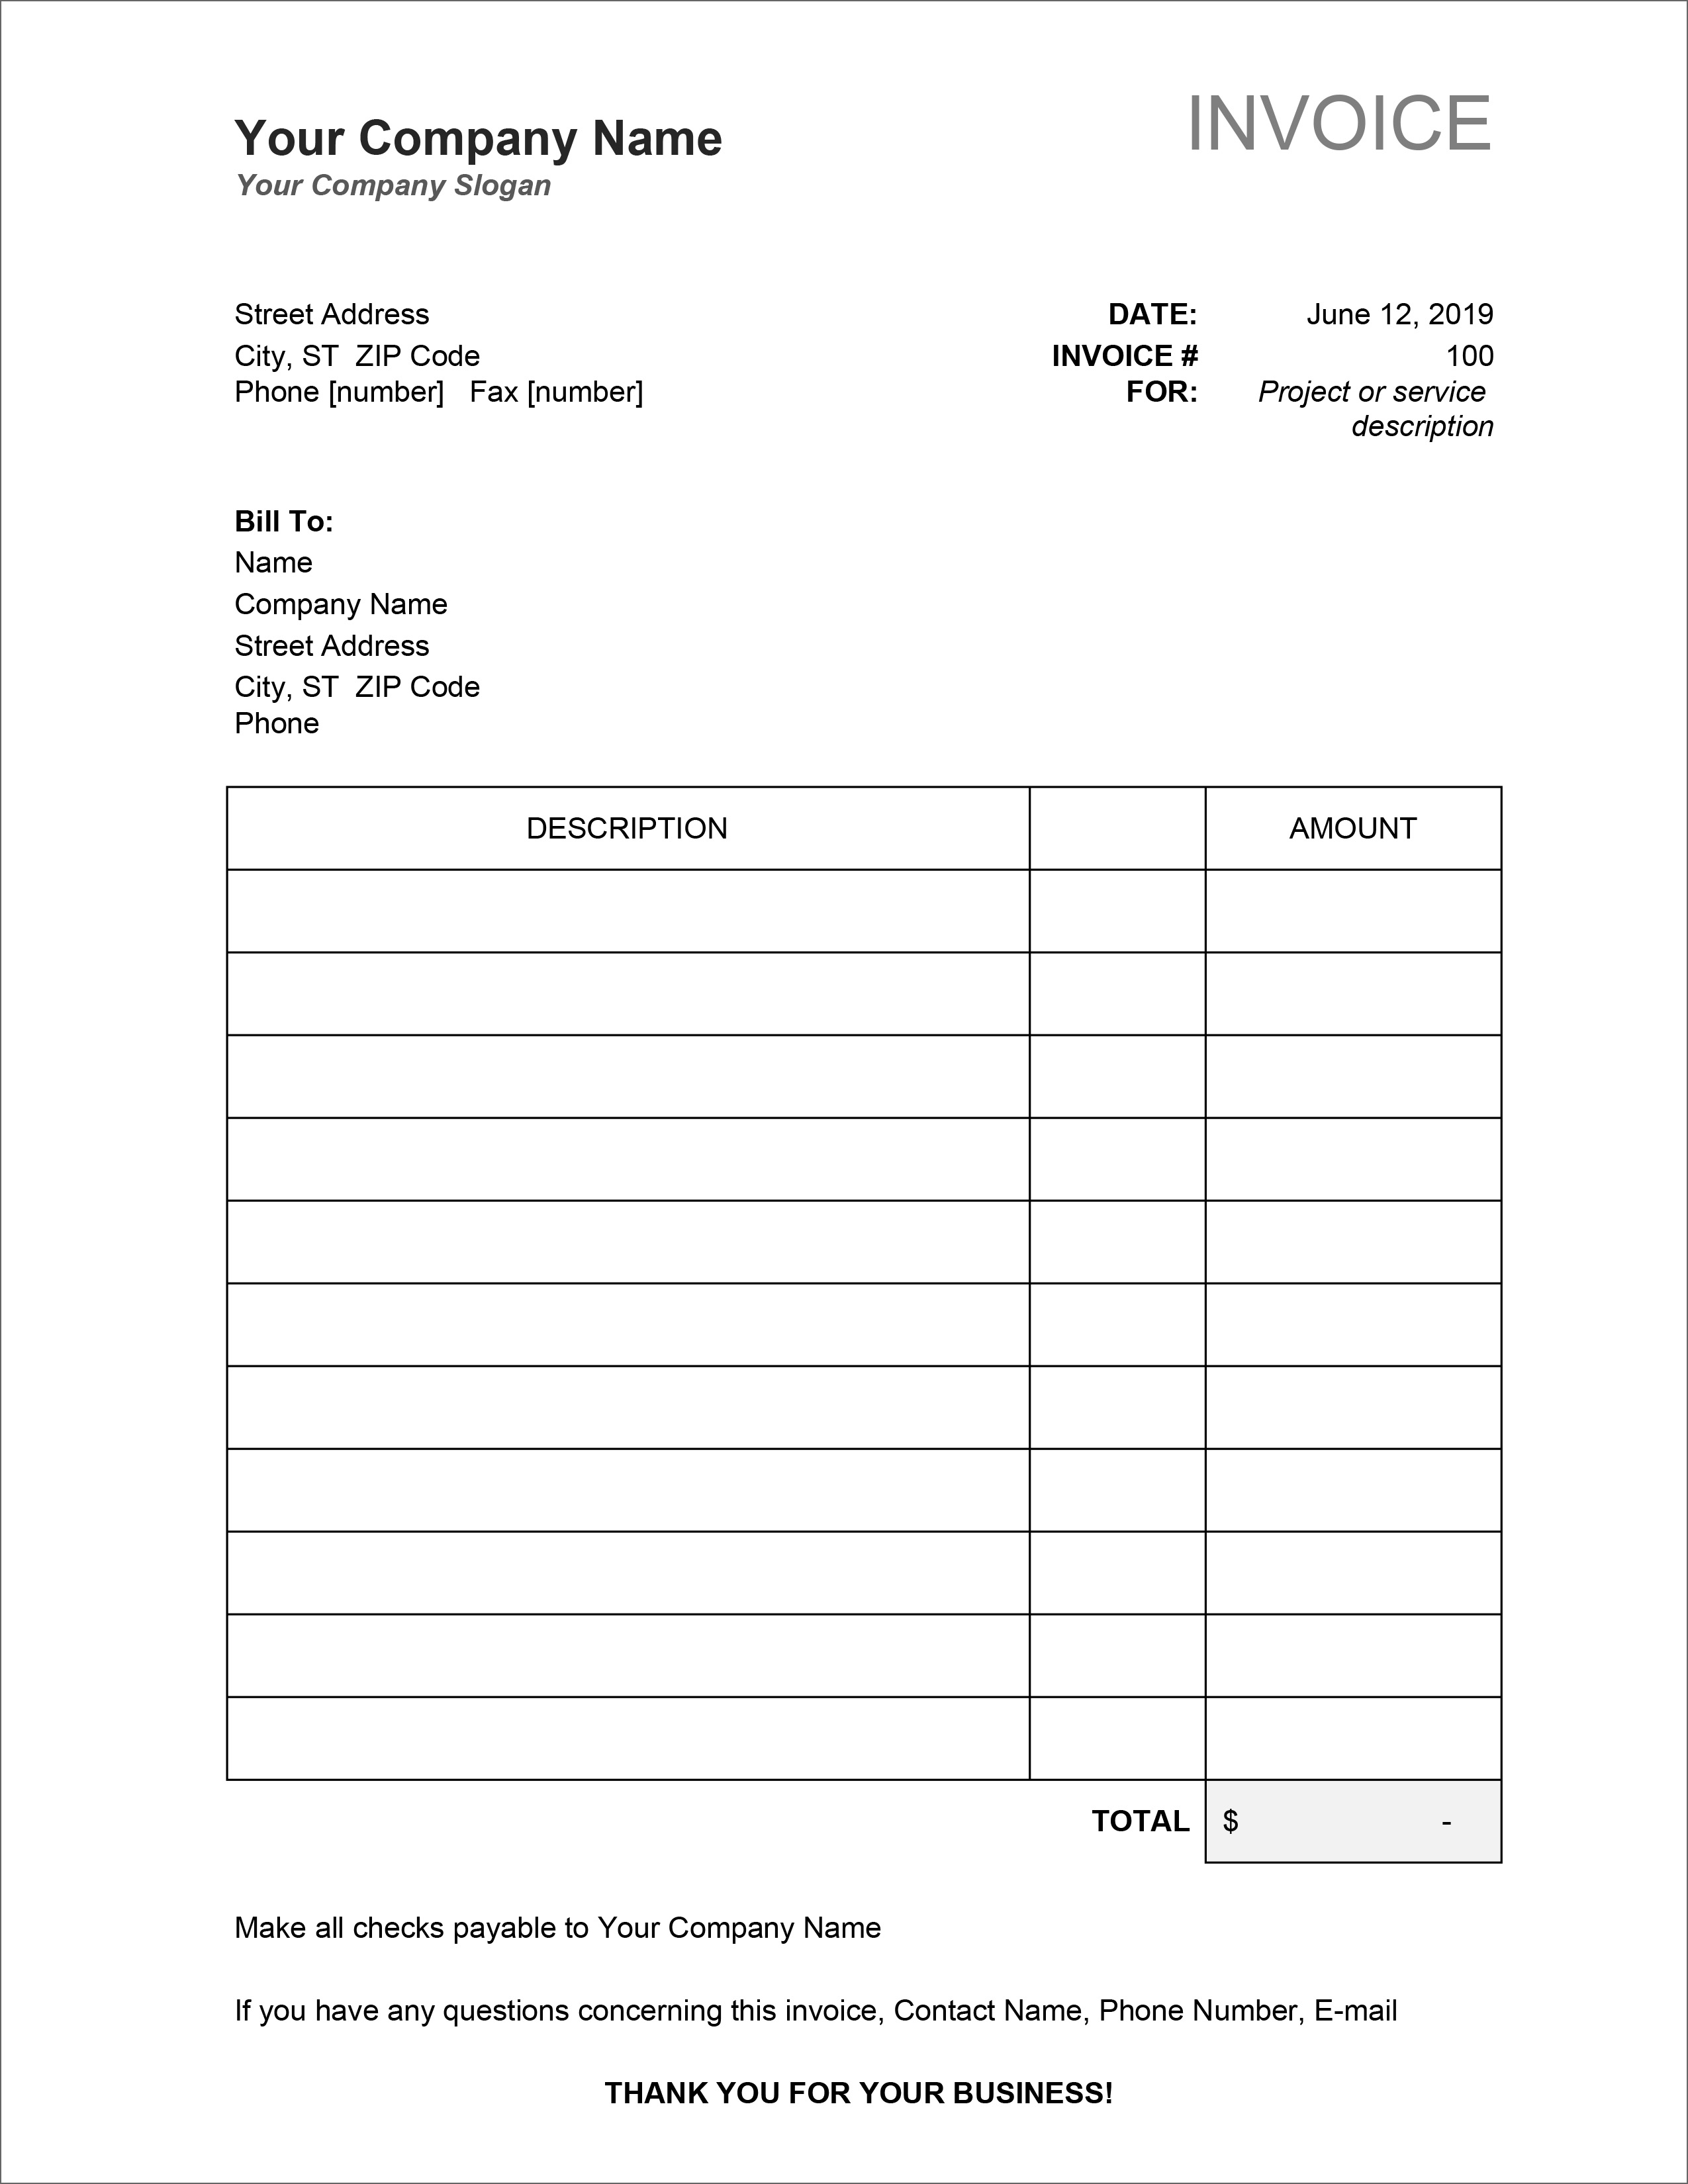 23 Free Invoice Templates In Microsoft Excel And DOCX Formats Intended For Free Downloadable Invoice Template